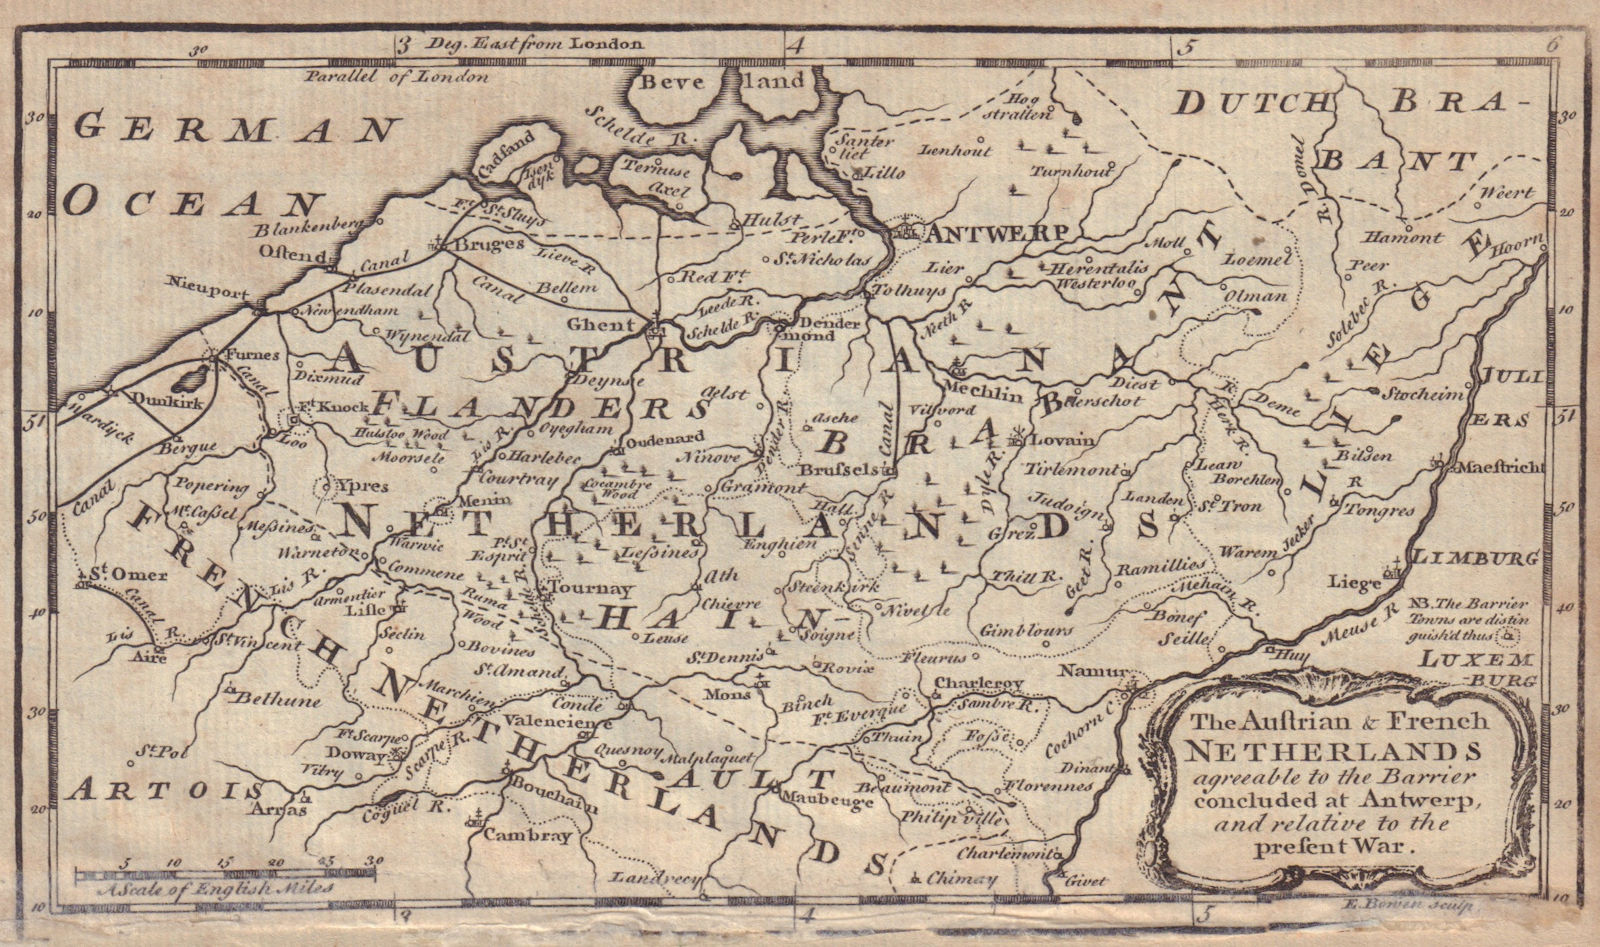 Associate Product The Austrian & French Netherlands. Belgium & French Flanders. BOWEN 1744 map